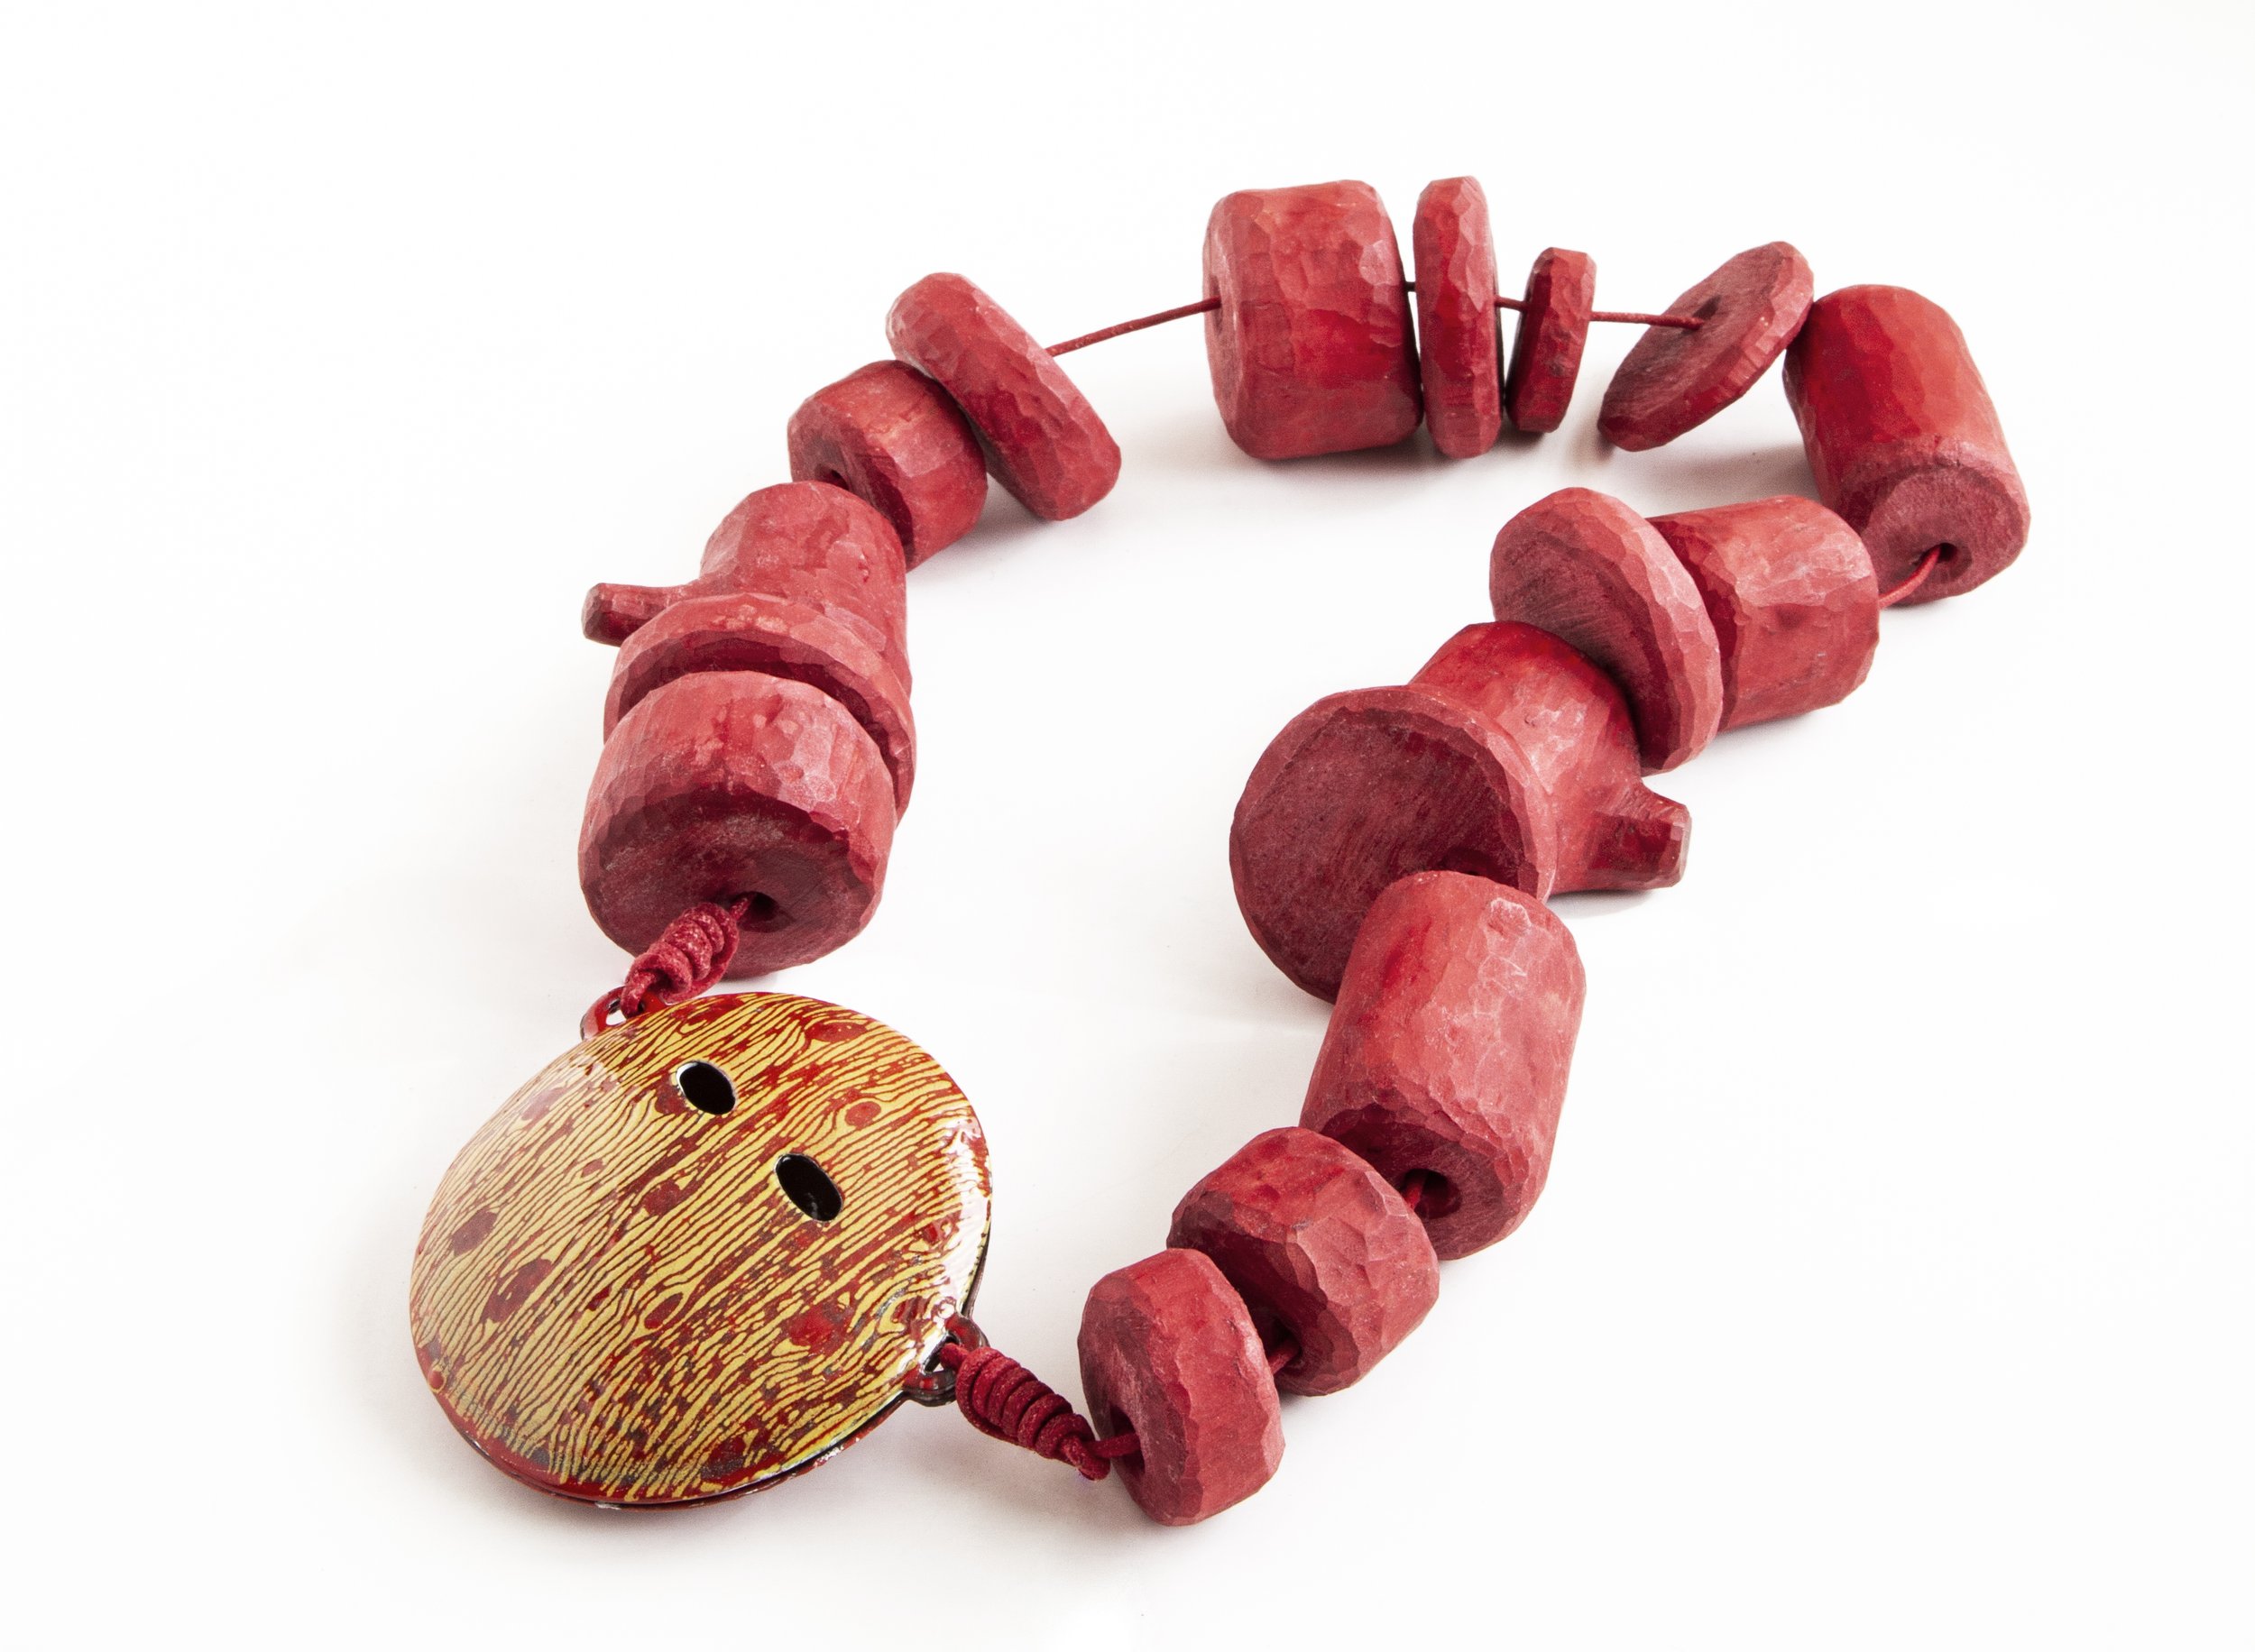  Worry Beads #2 (The Pandemic Edition) 2021 Necklace. Wild cherry wood, enameled copper, waxed cotton thread  